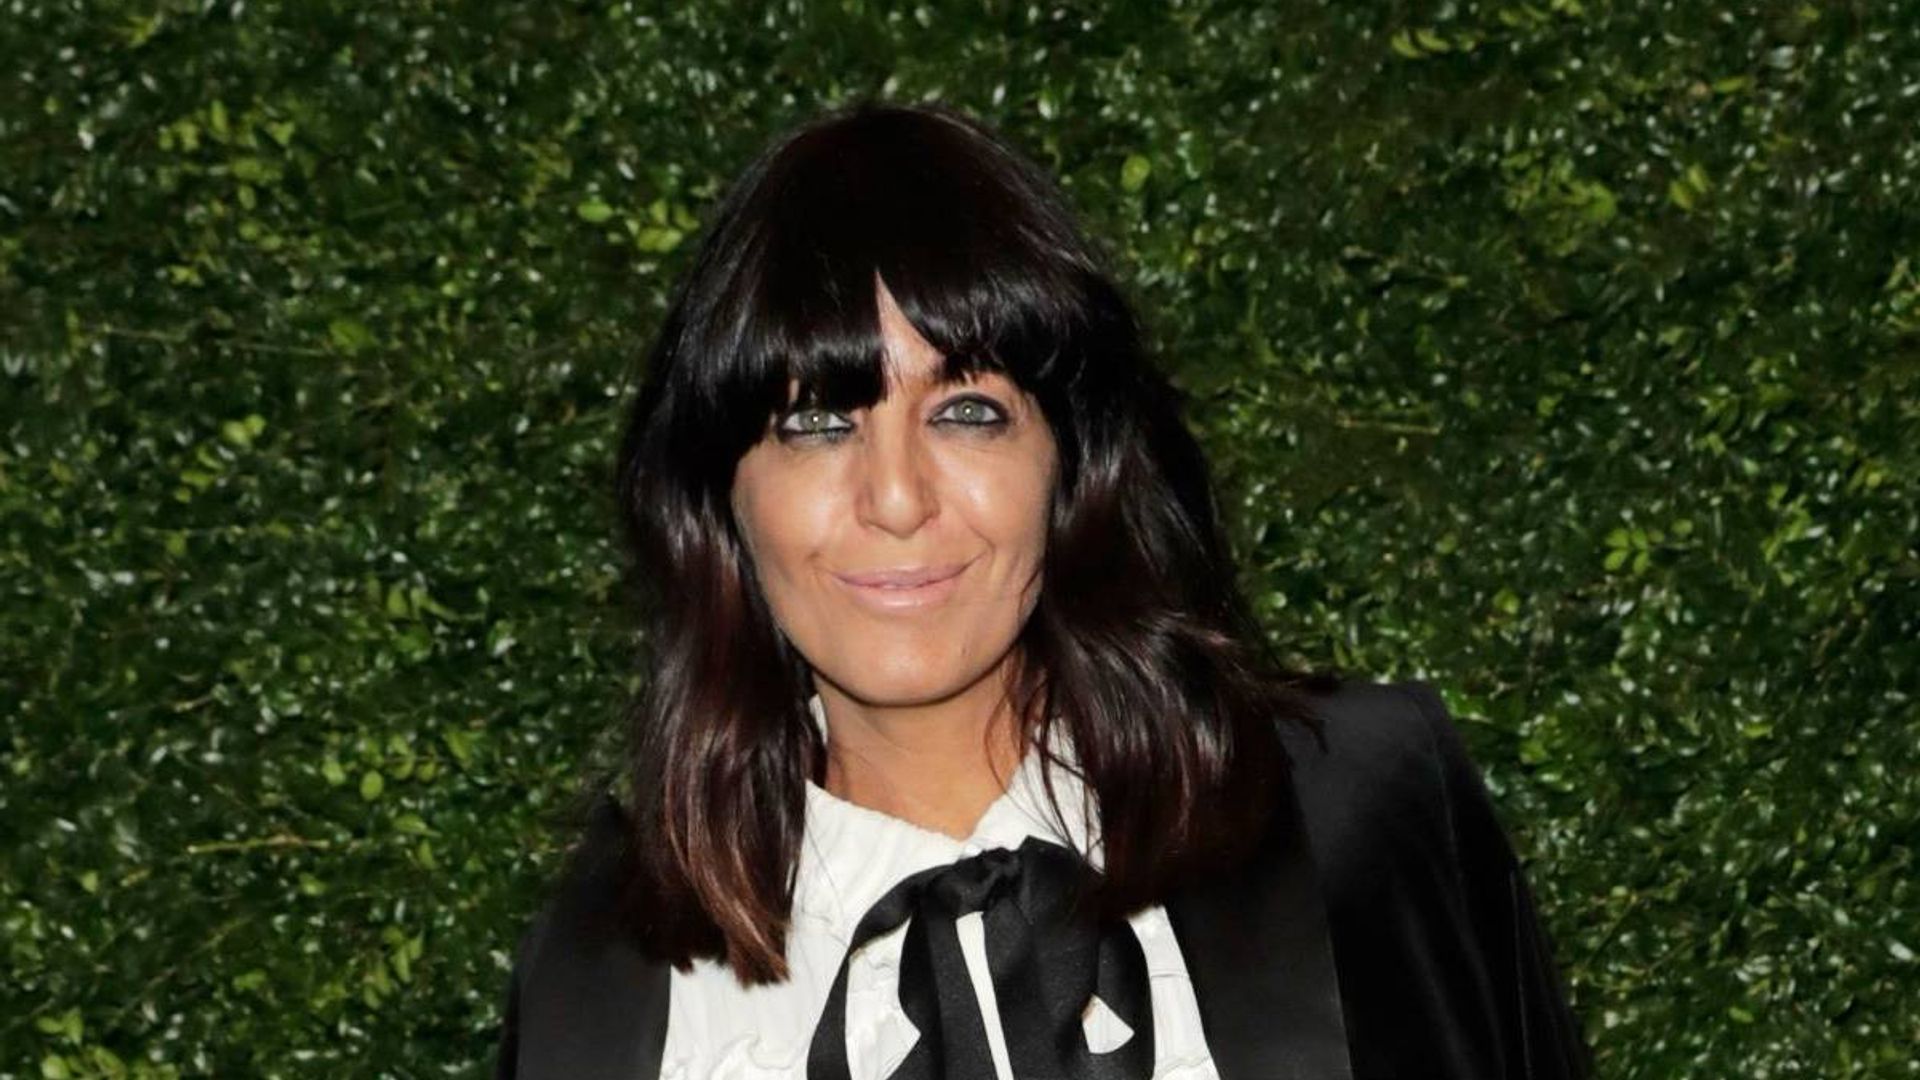 Claudia Winkleman looks incredible in crisp blazer and leggings for Strictly results show